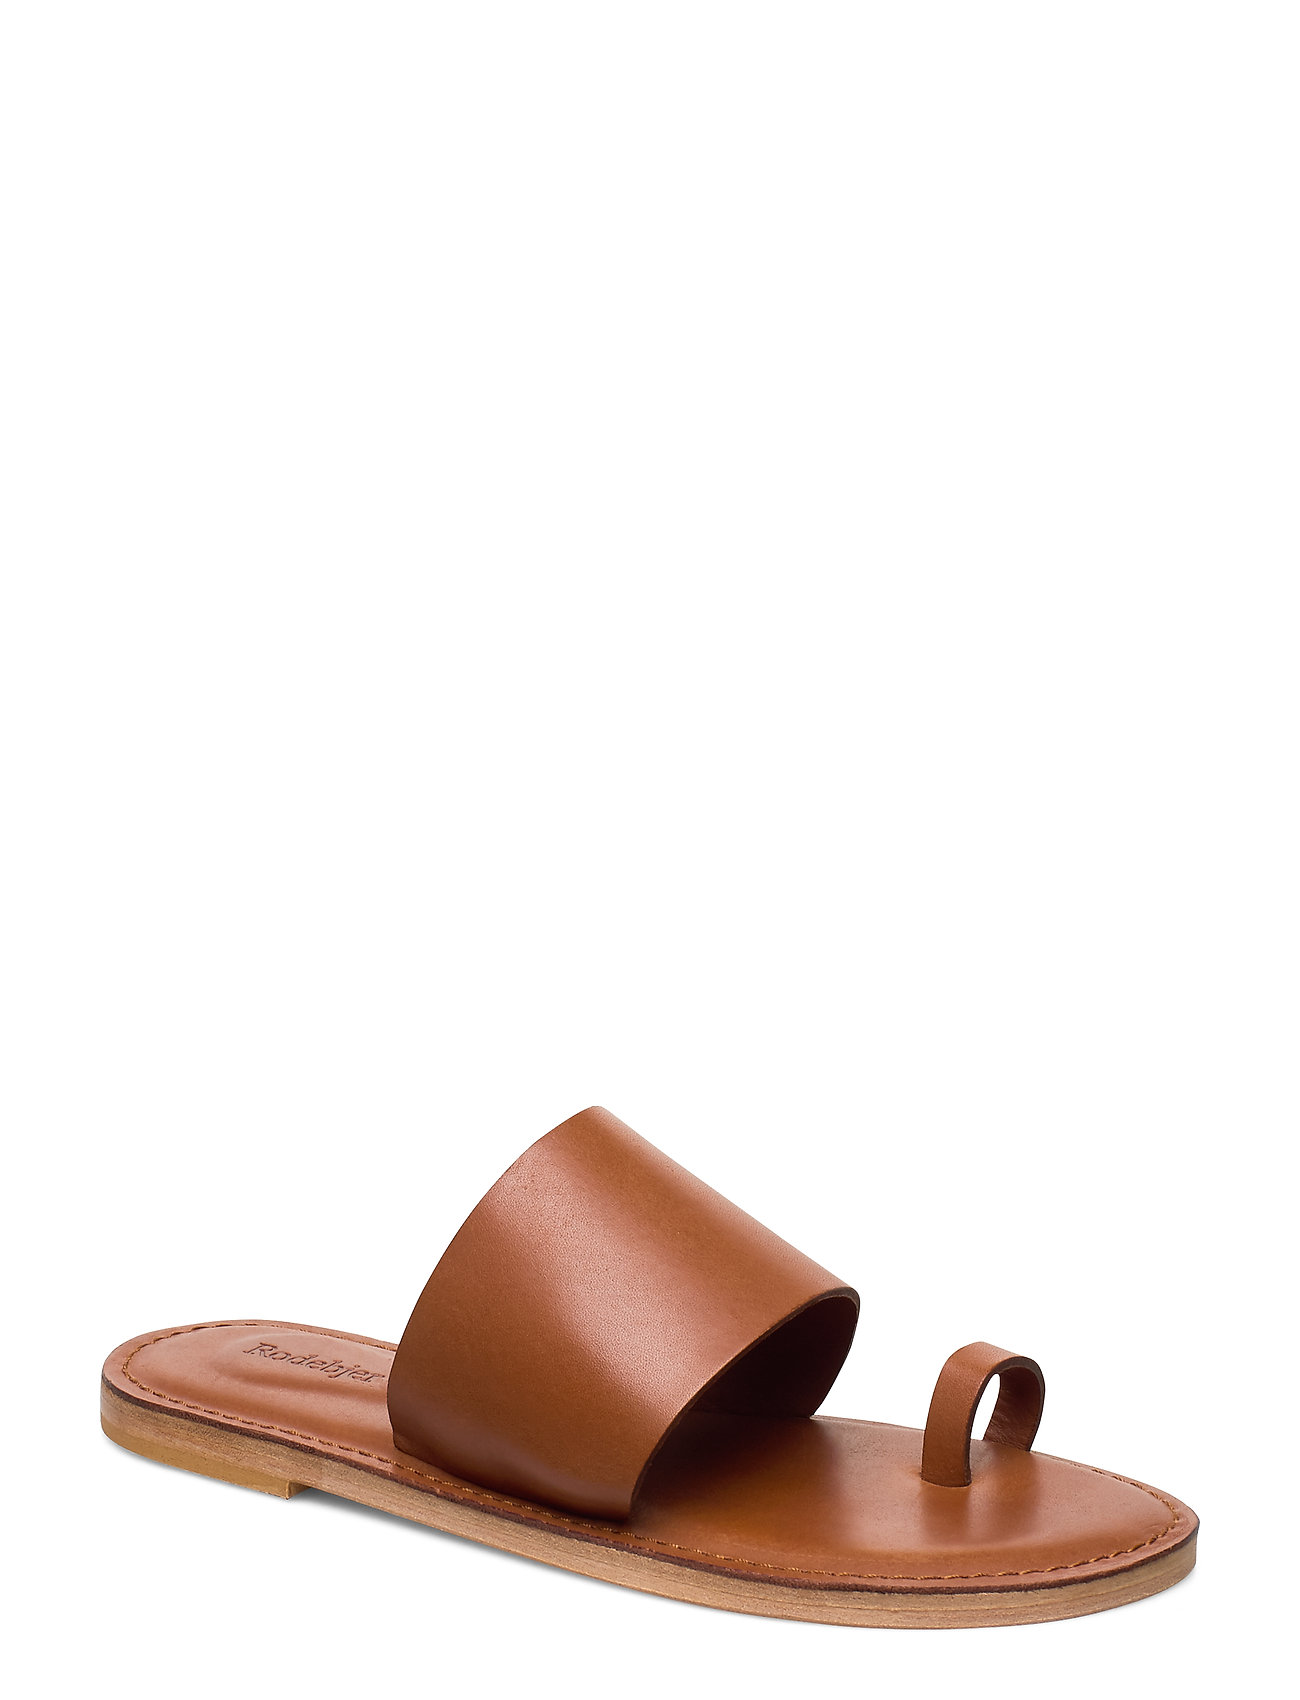 Rodebjer Kate Shoes Summer Shoes Flat Sandals Ruskea RODEBJER